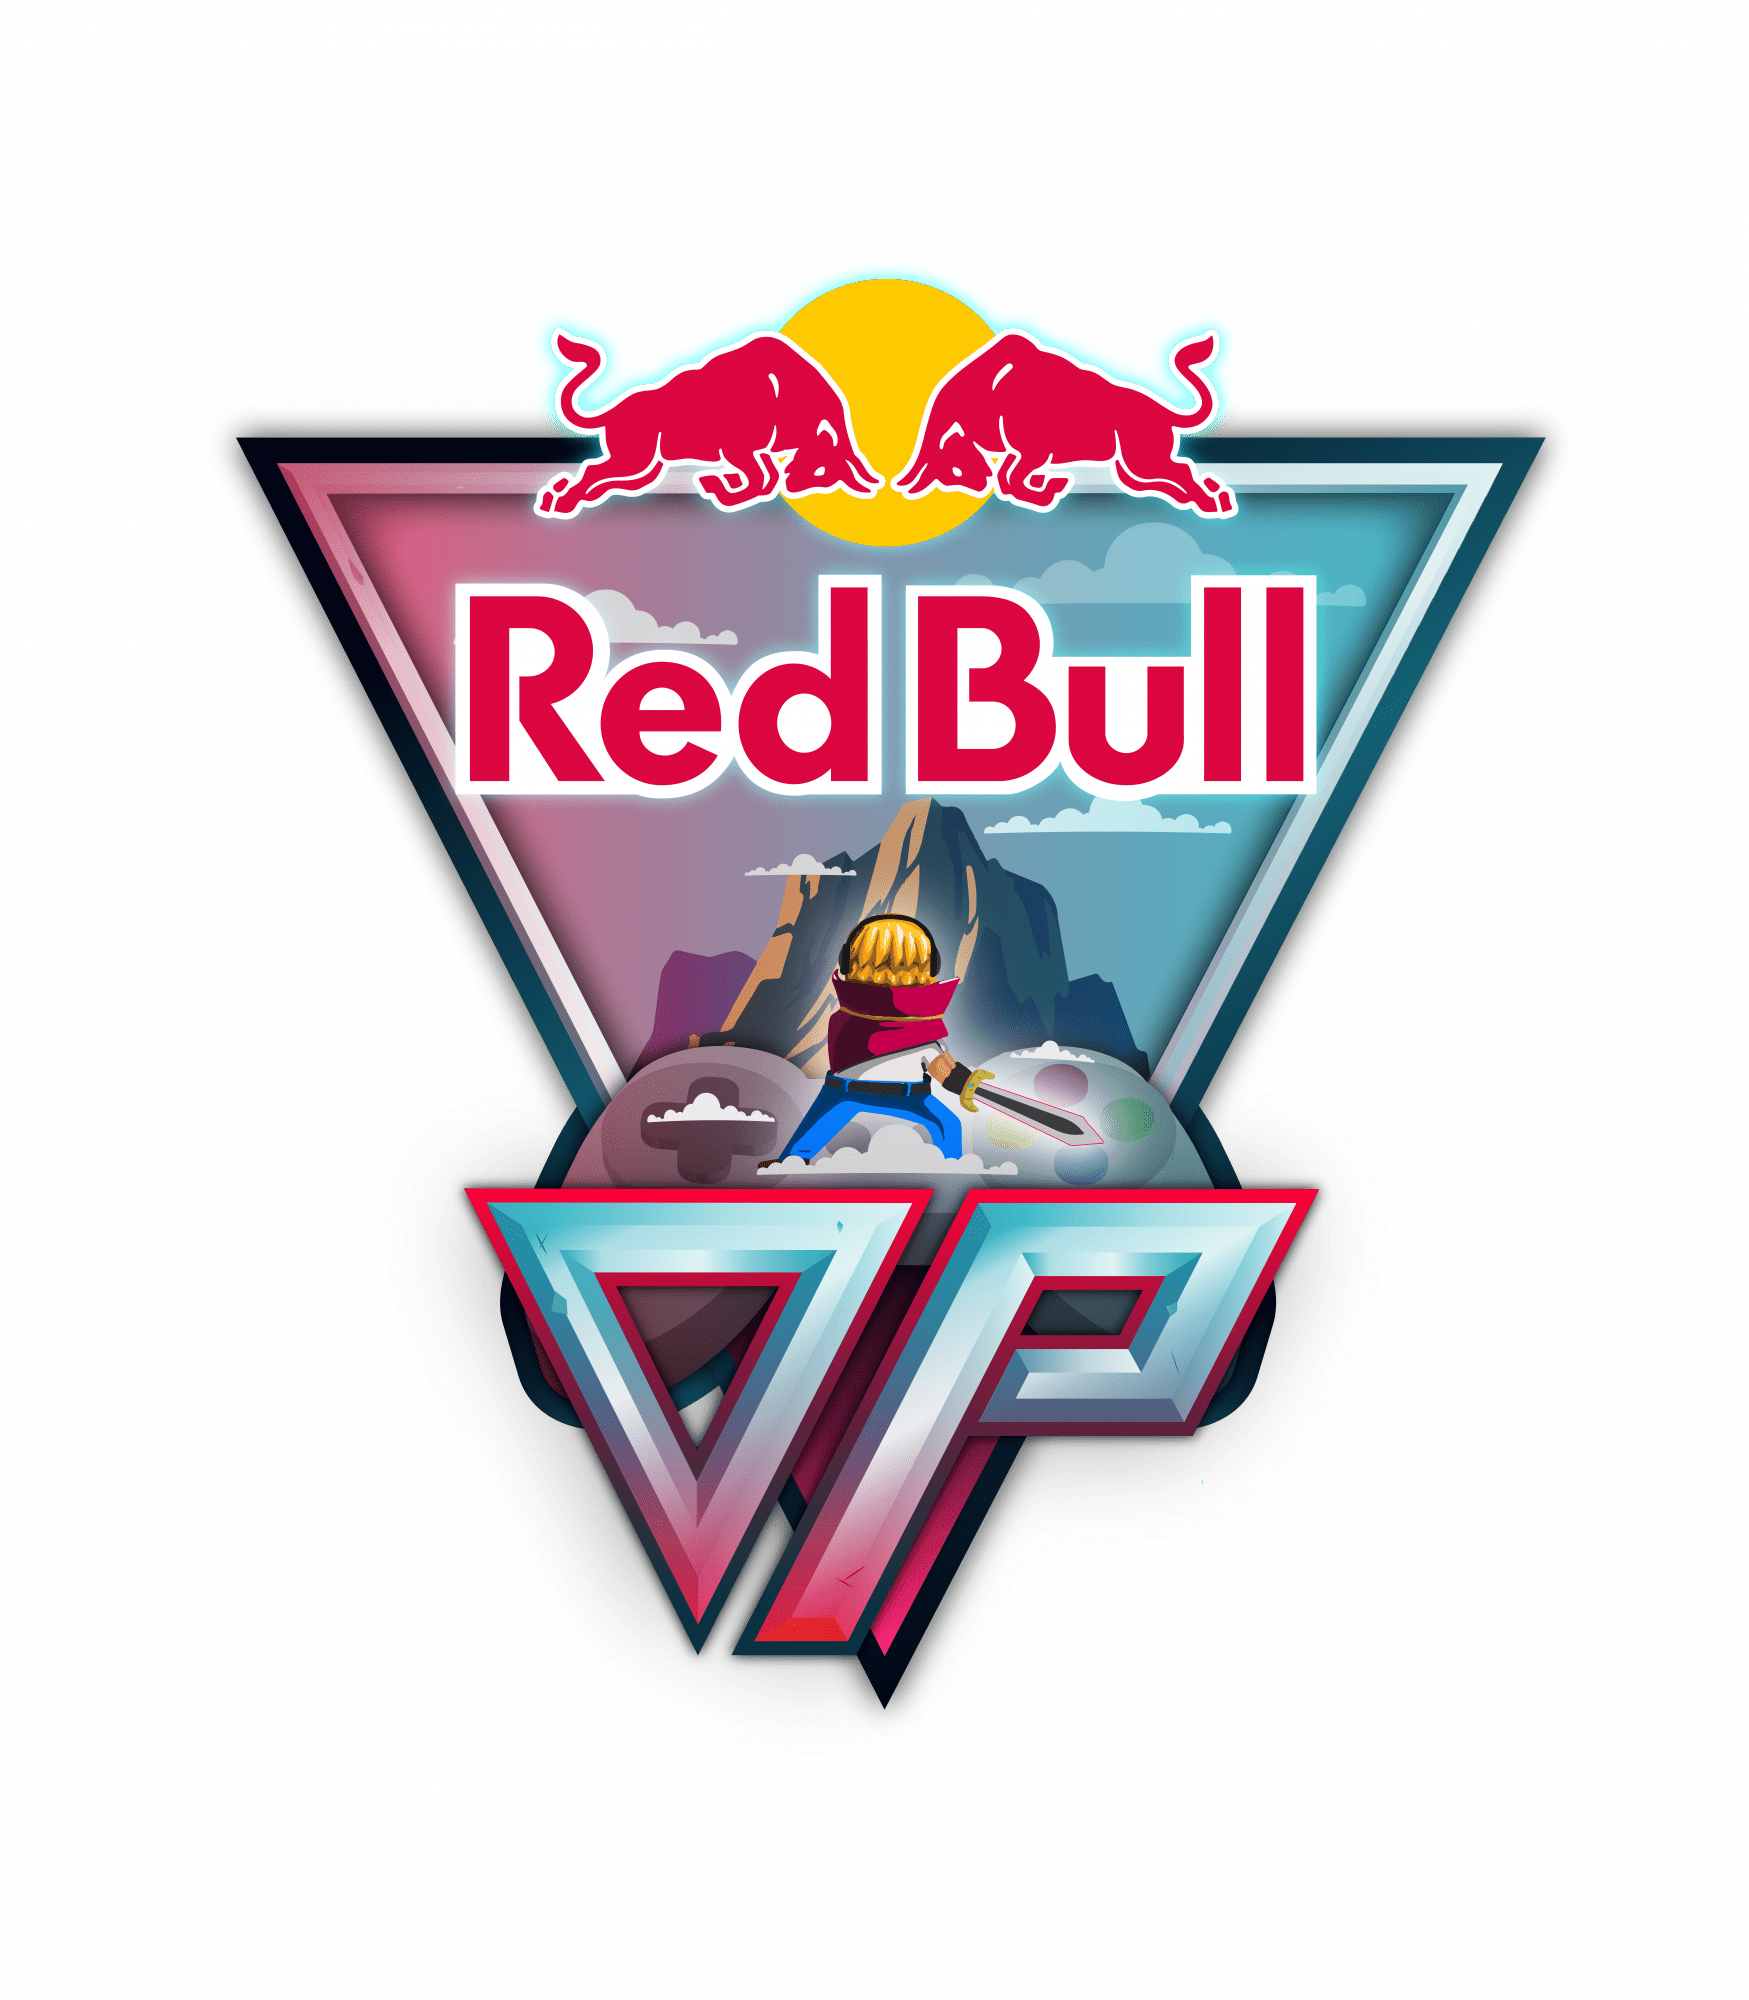 Red Bull OP: the new format that tests streamers